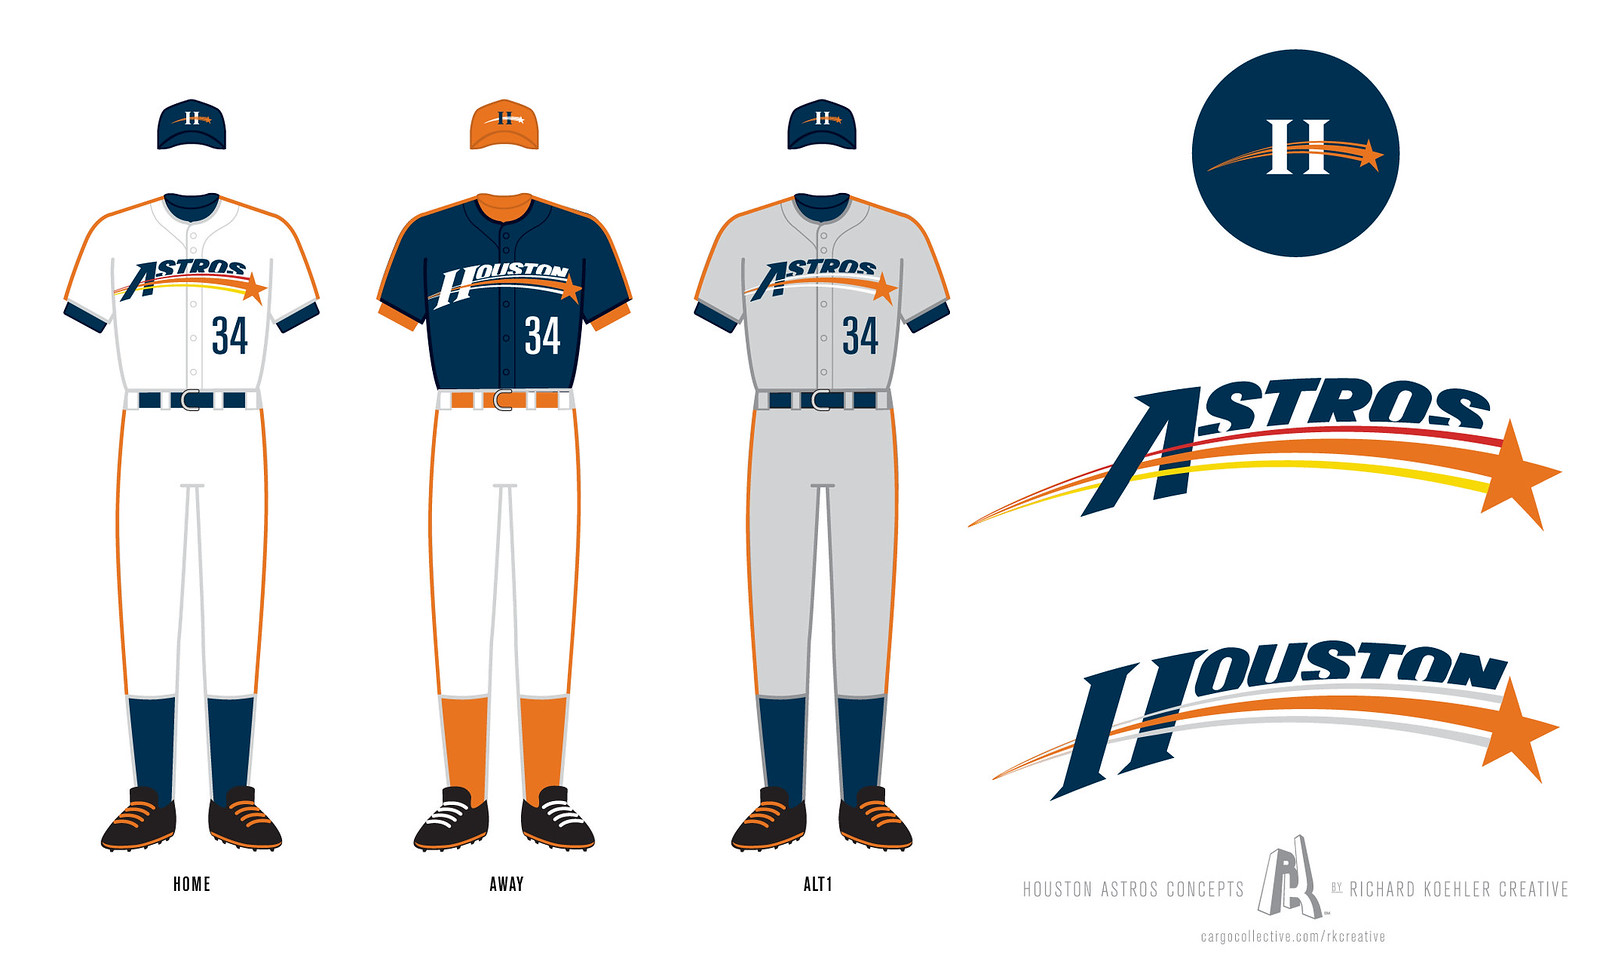 astros uniforms over the years